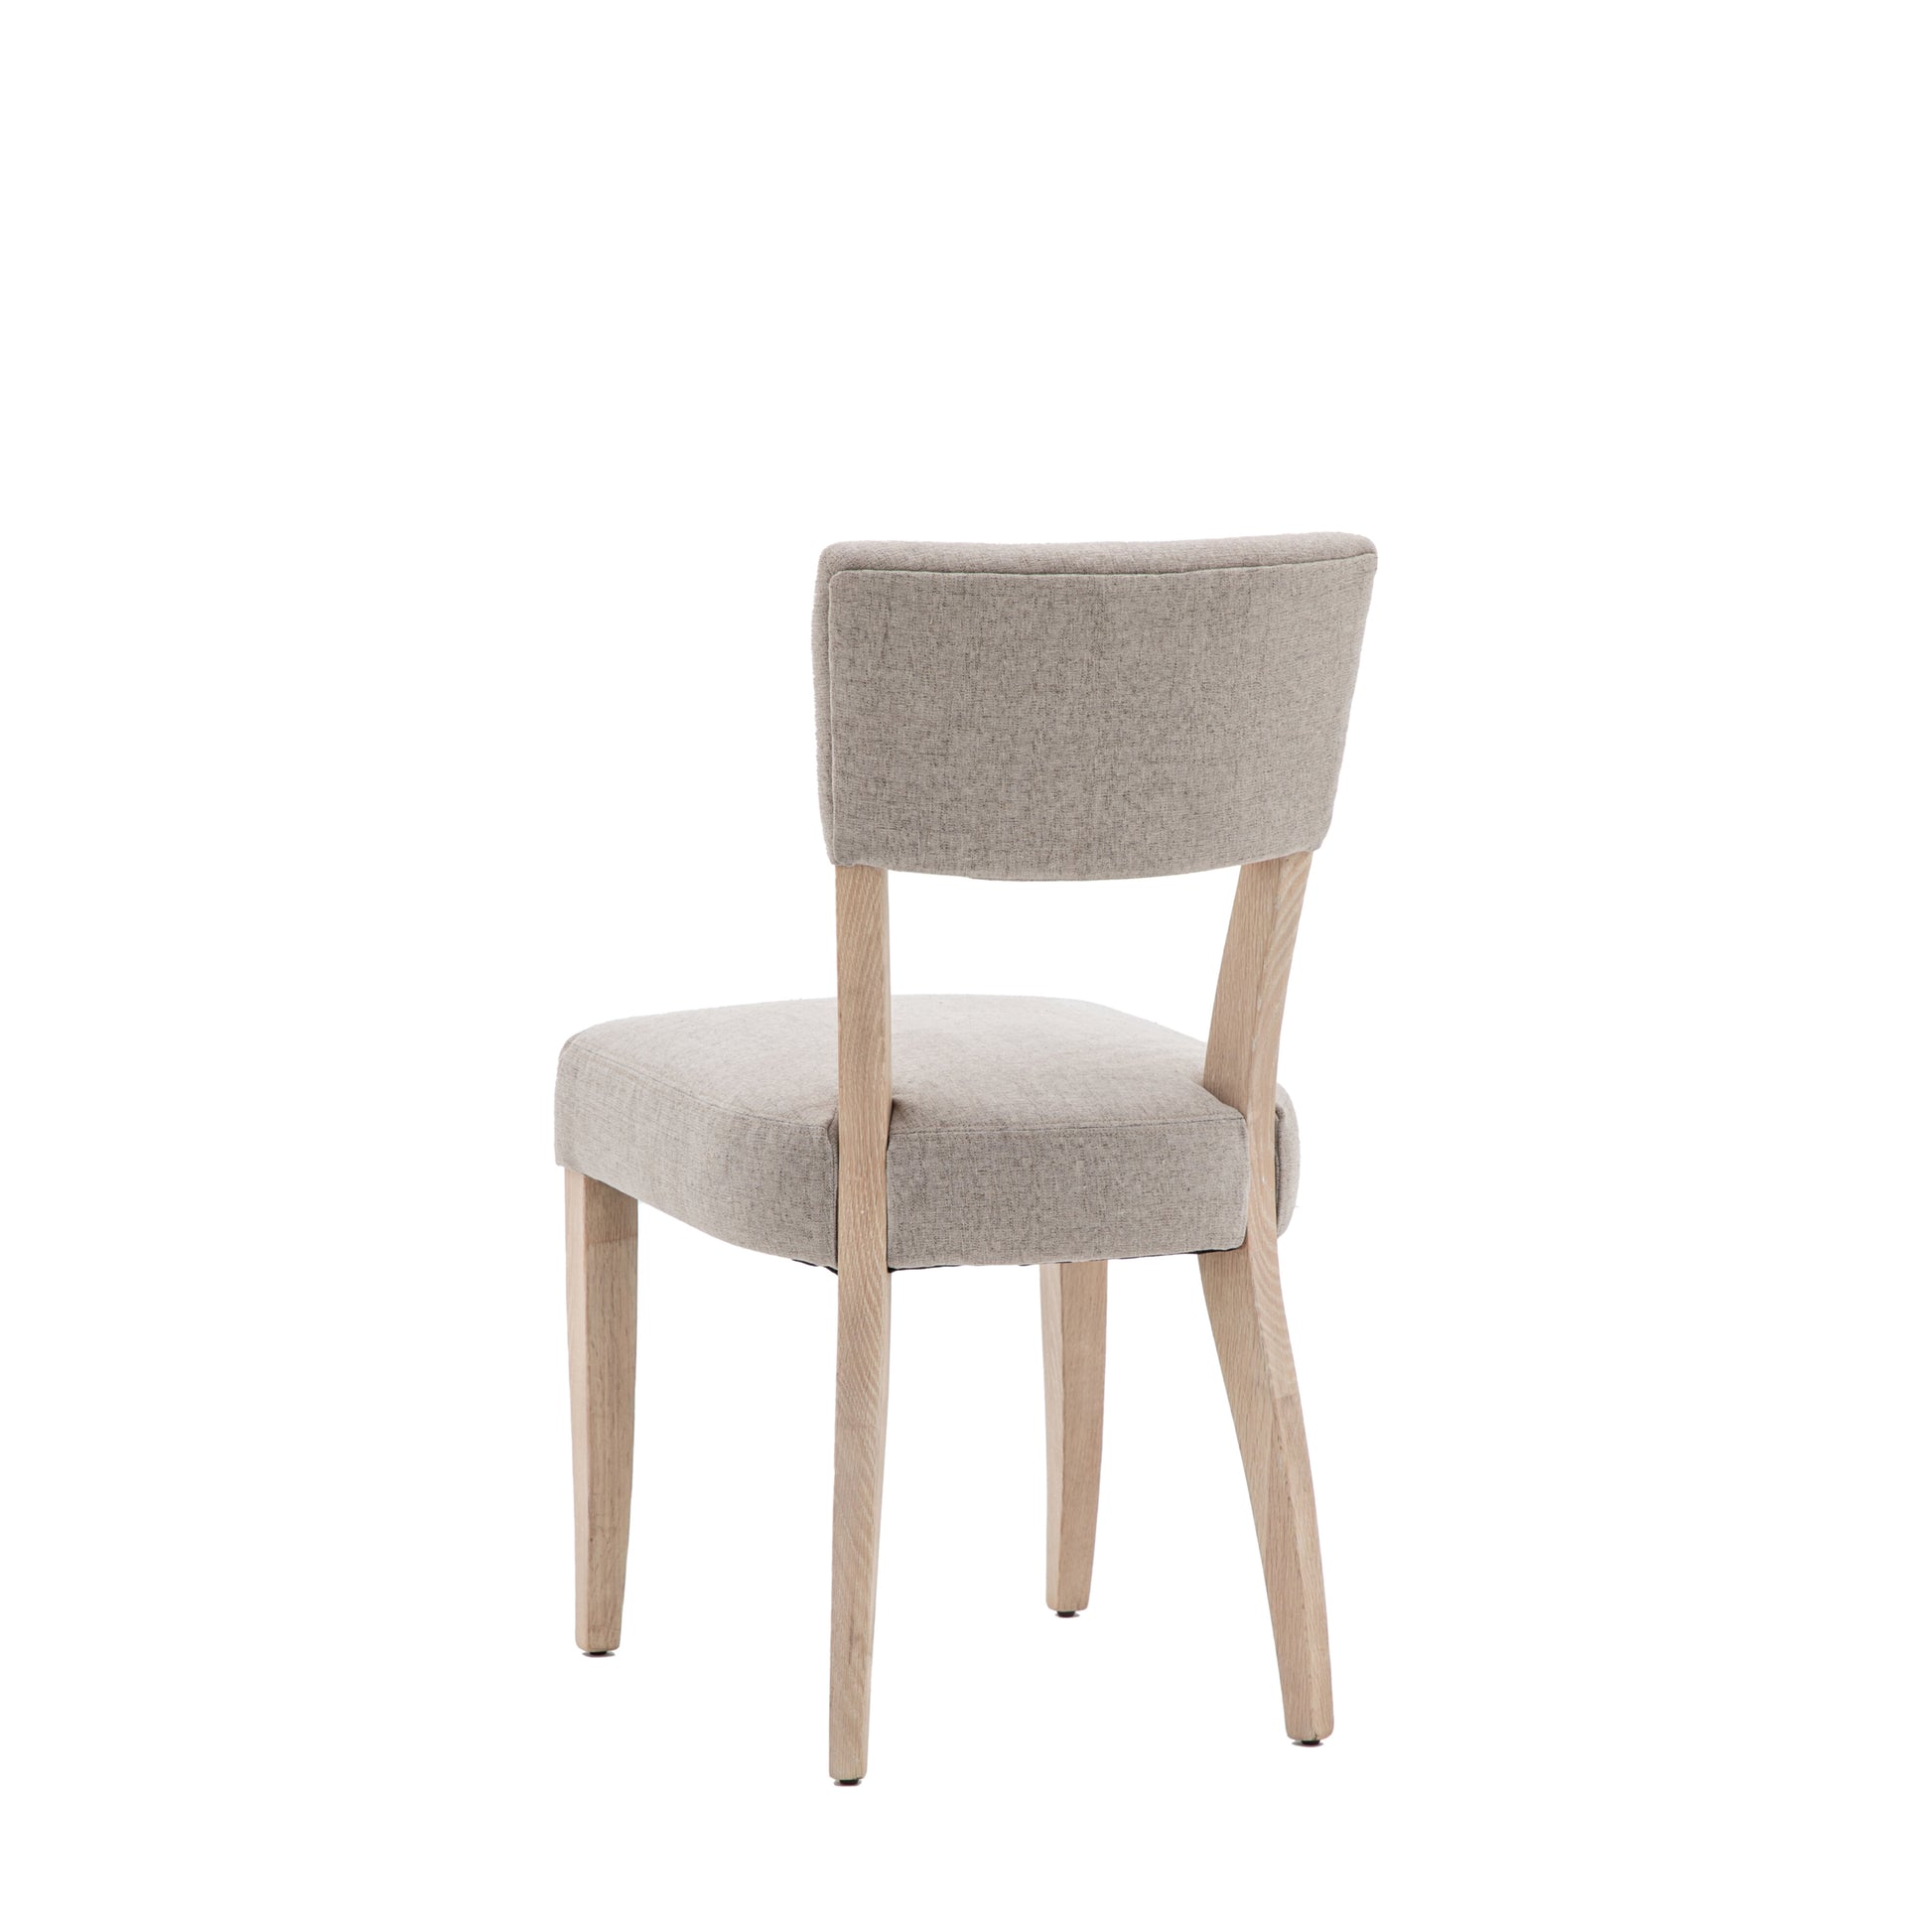 Asher Upholstered Dining Chair (2 Pack)